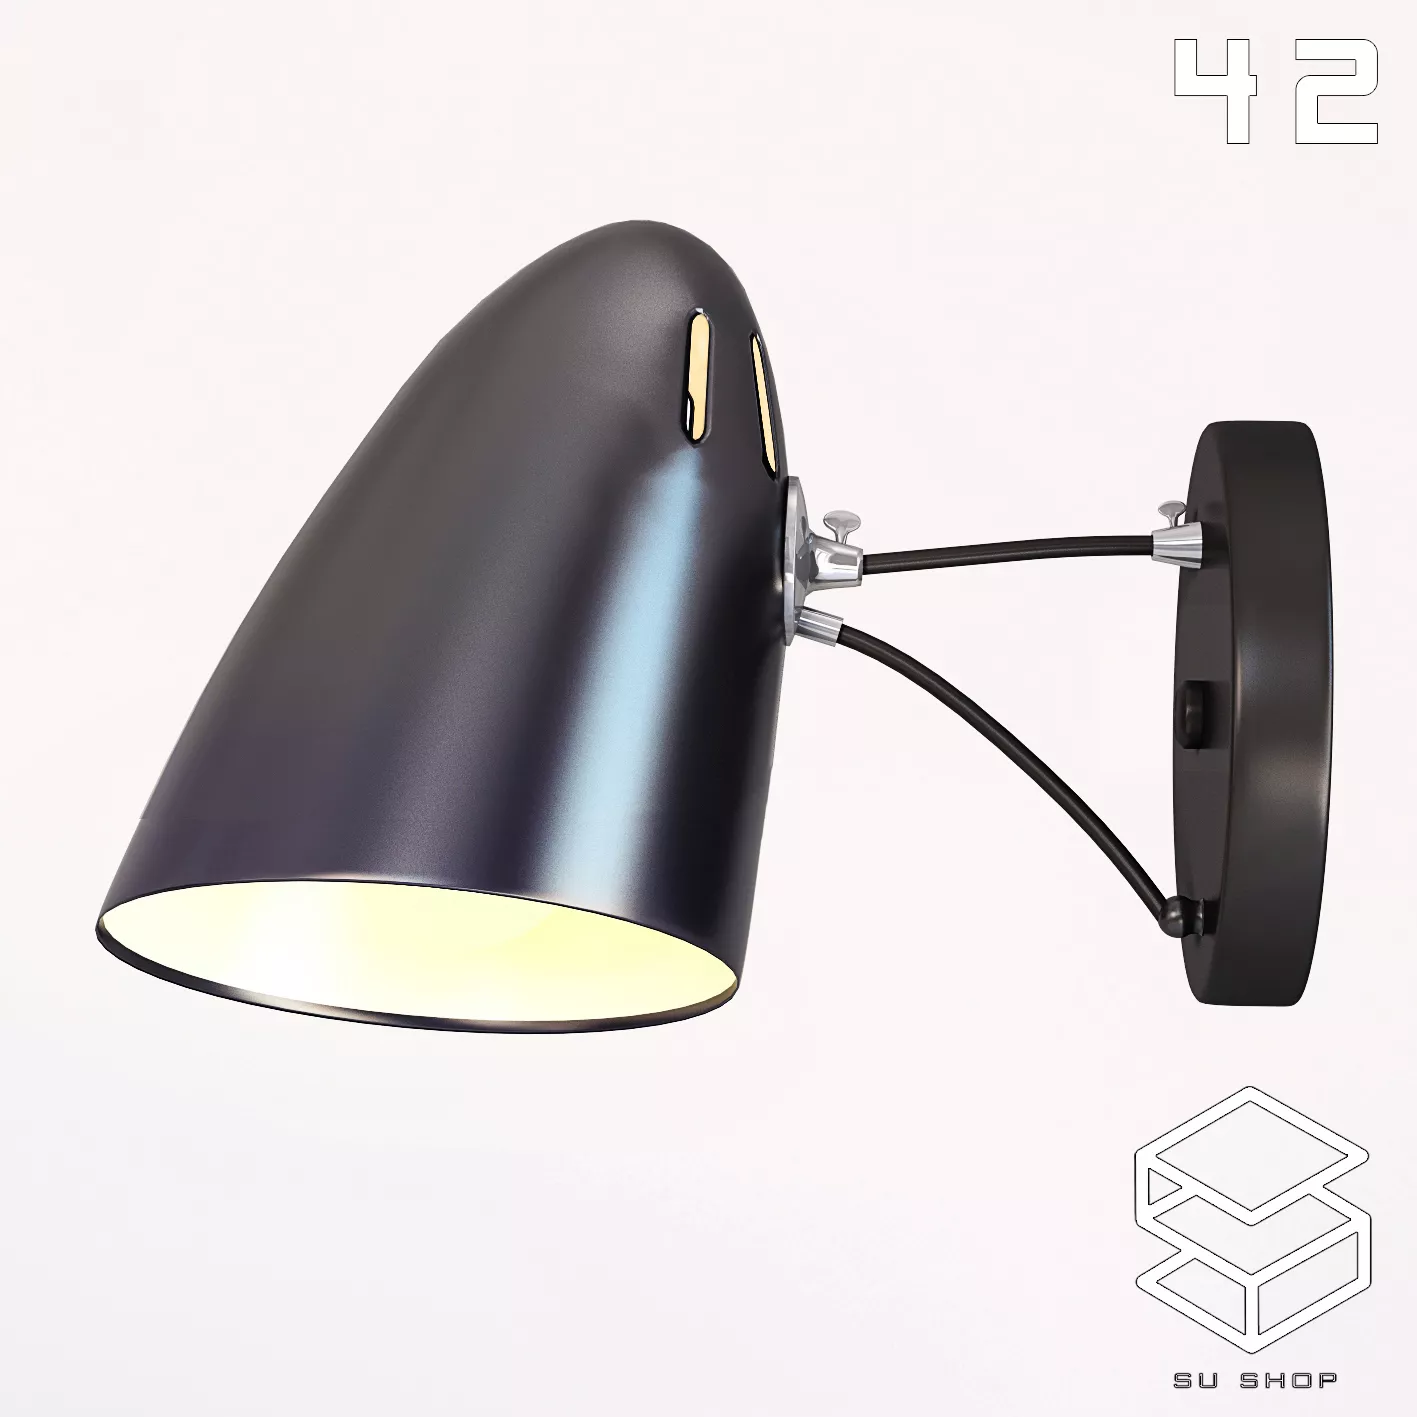 MODERN WALL LAMP - SKETCHUP 3D MODEL - VRAY OR ENSCAPE - ID16295